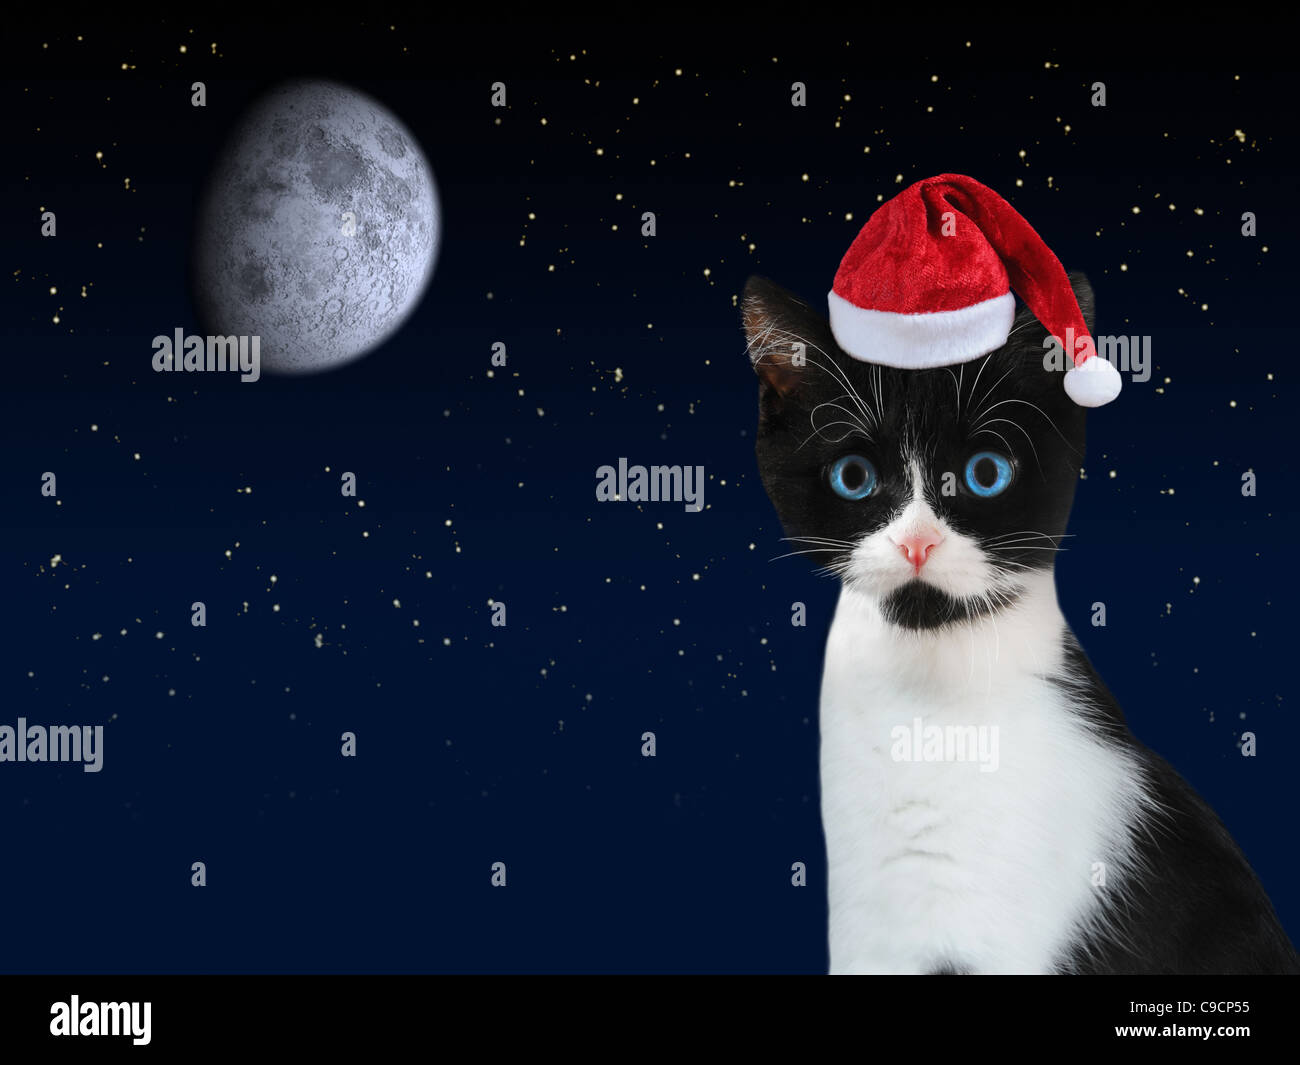 Black and white kitten with red Santa Claus cap and dark starry night sky with moon in the background. Stock Photo